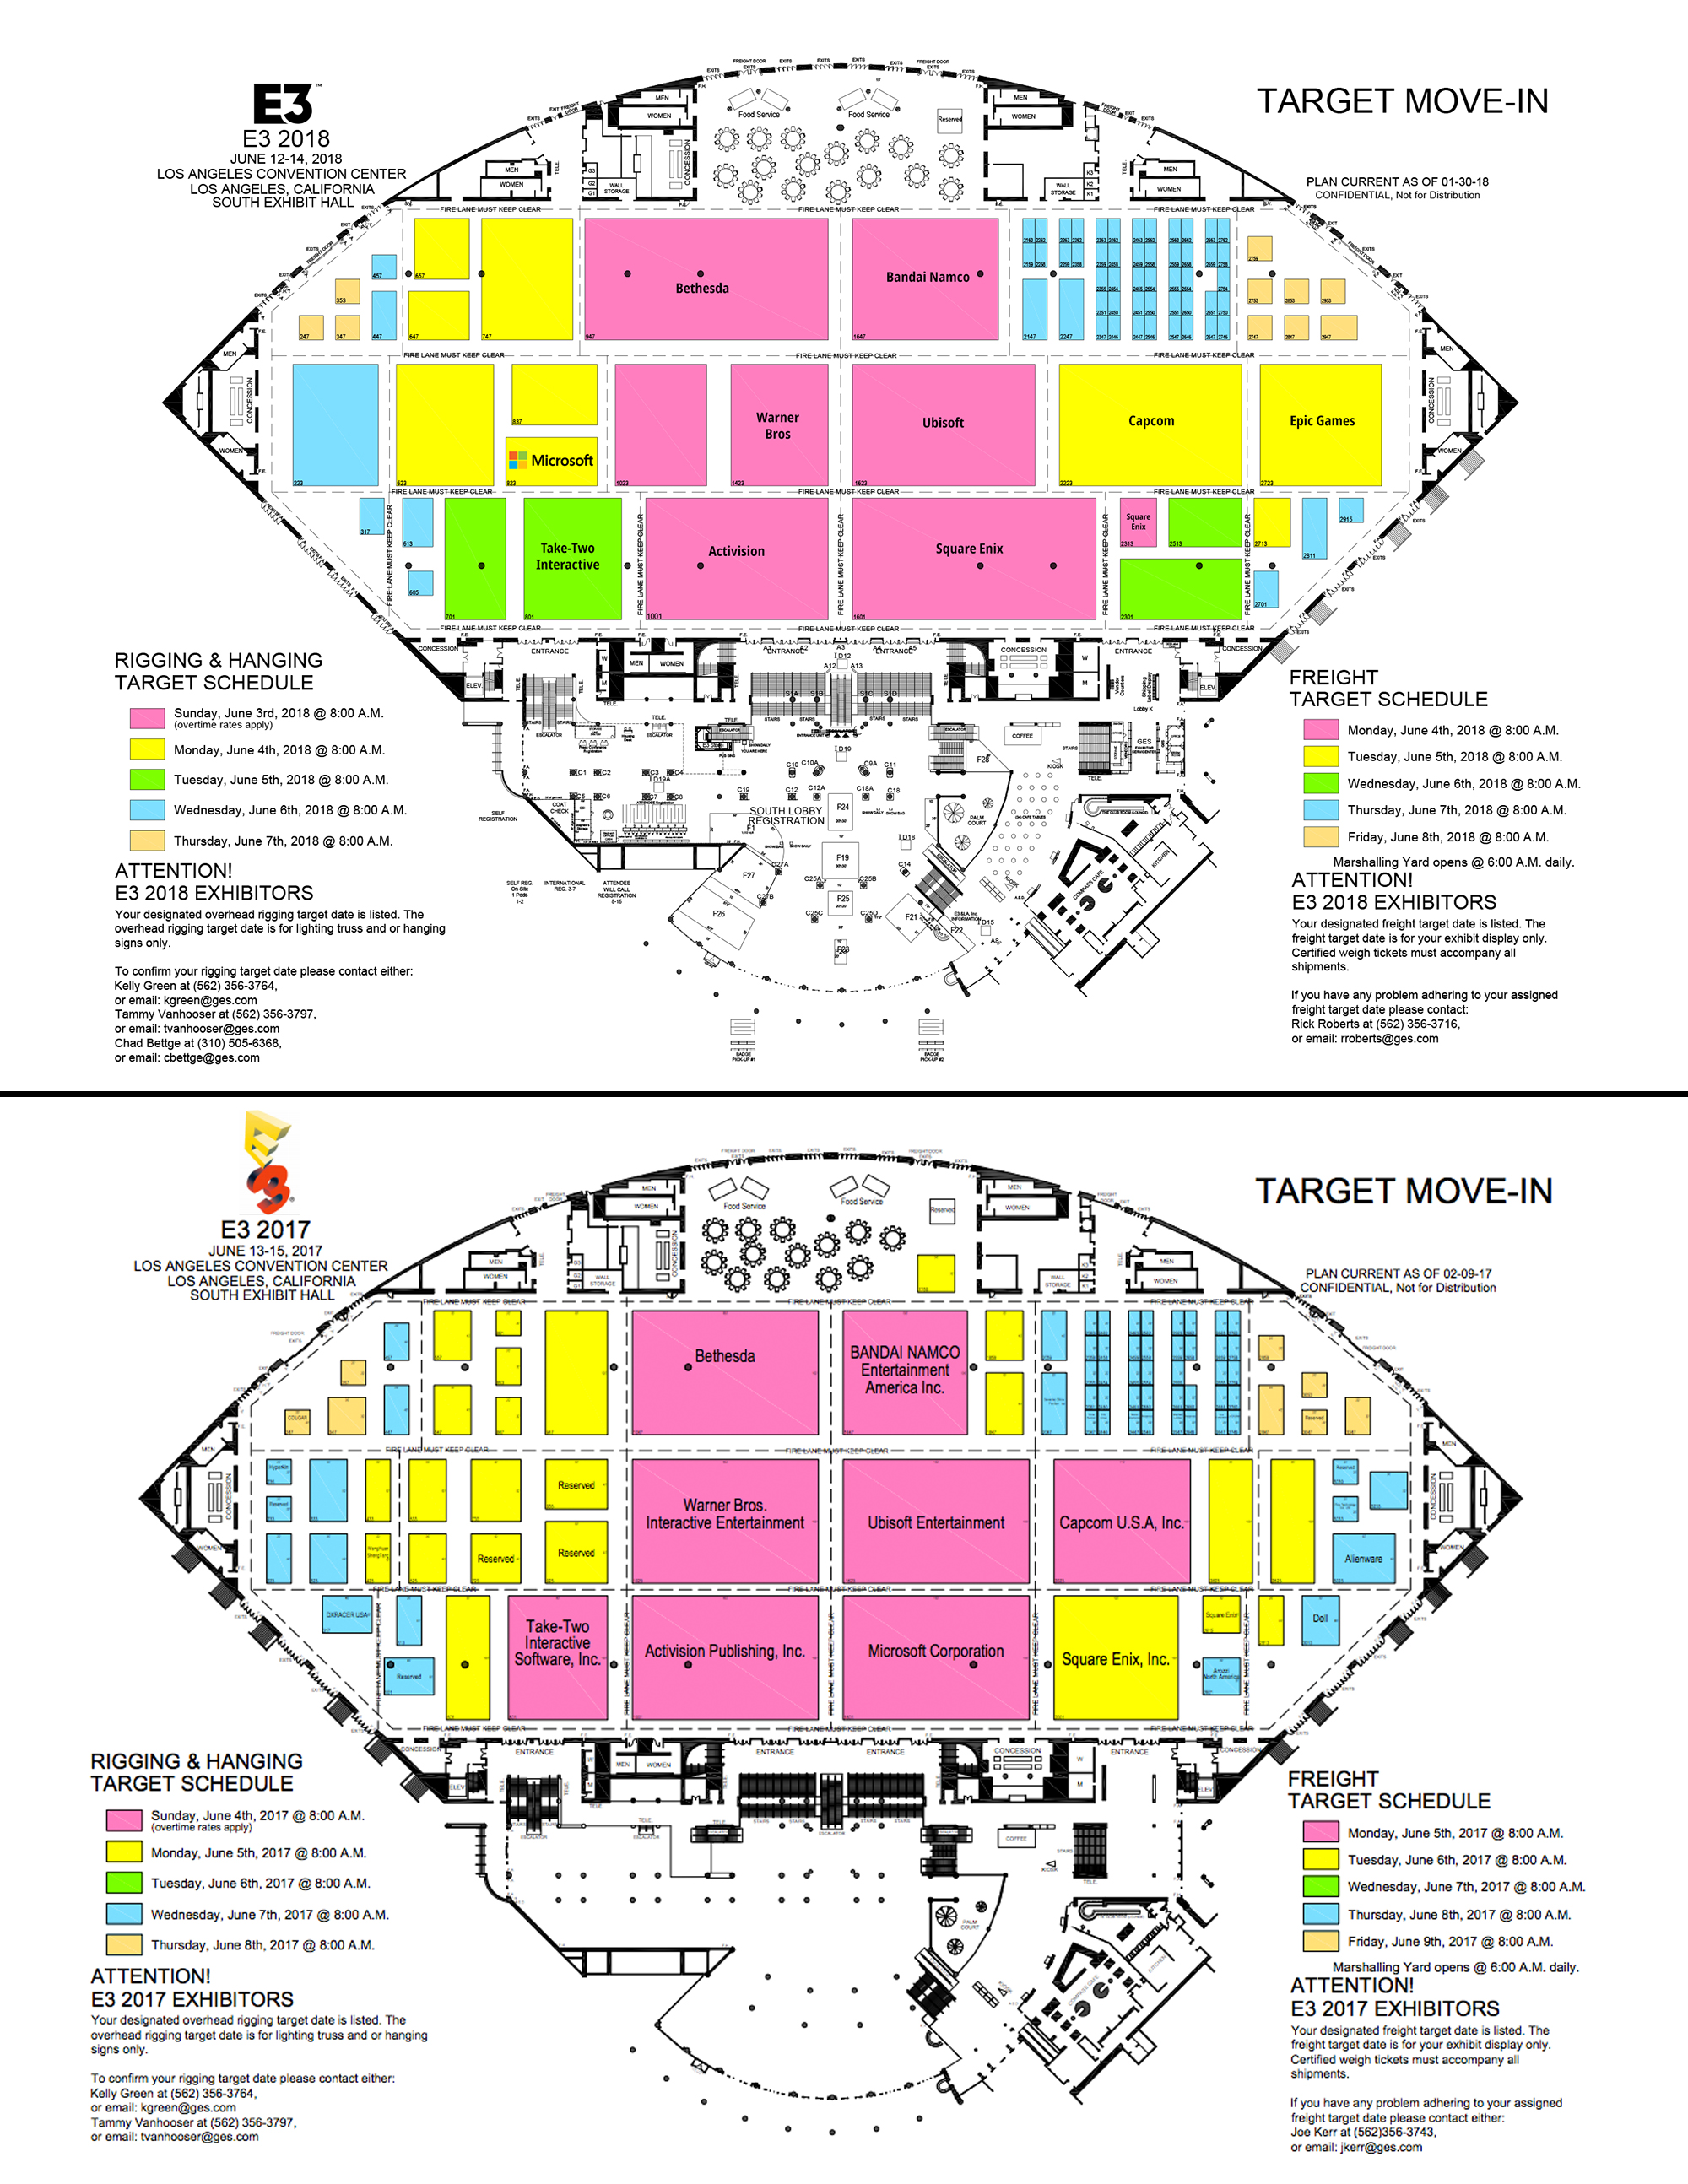 e3 2018 Floor Plans Are Here Cat with Monocle